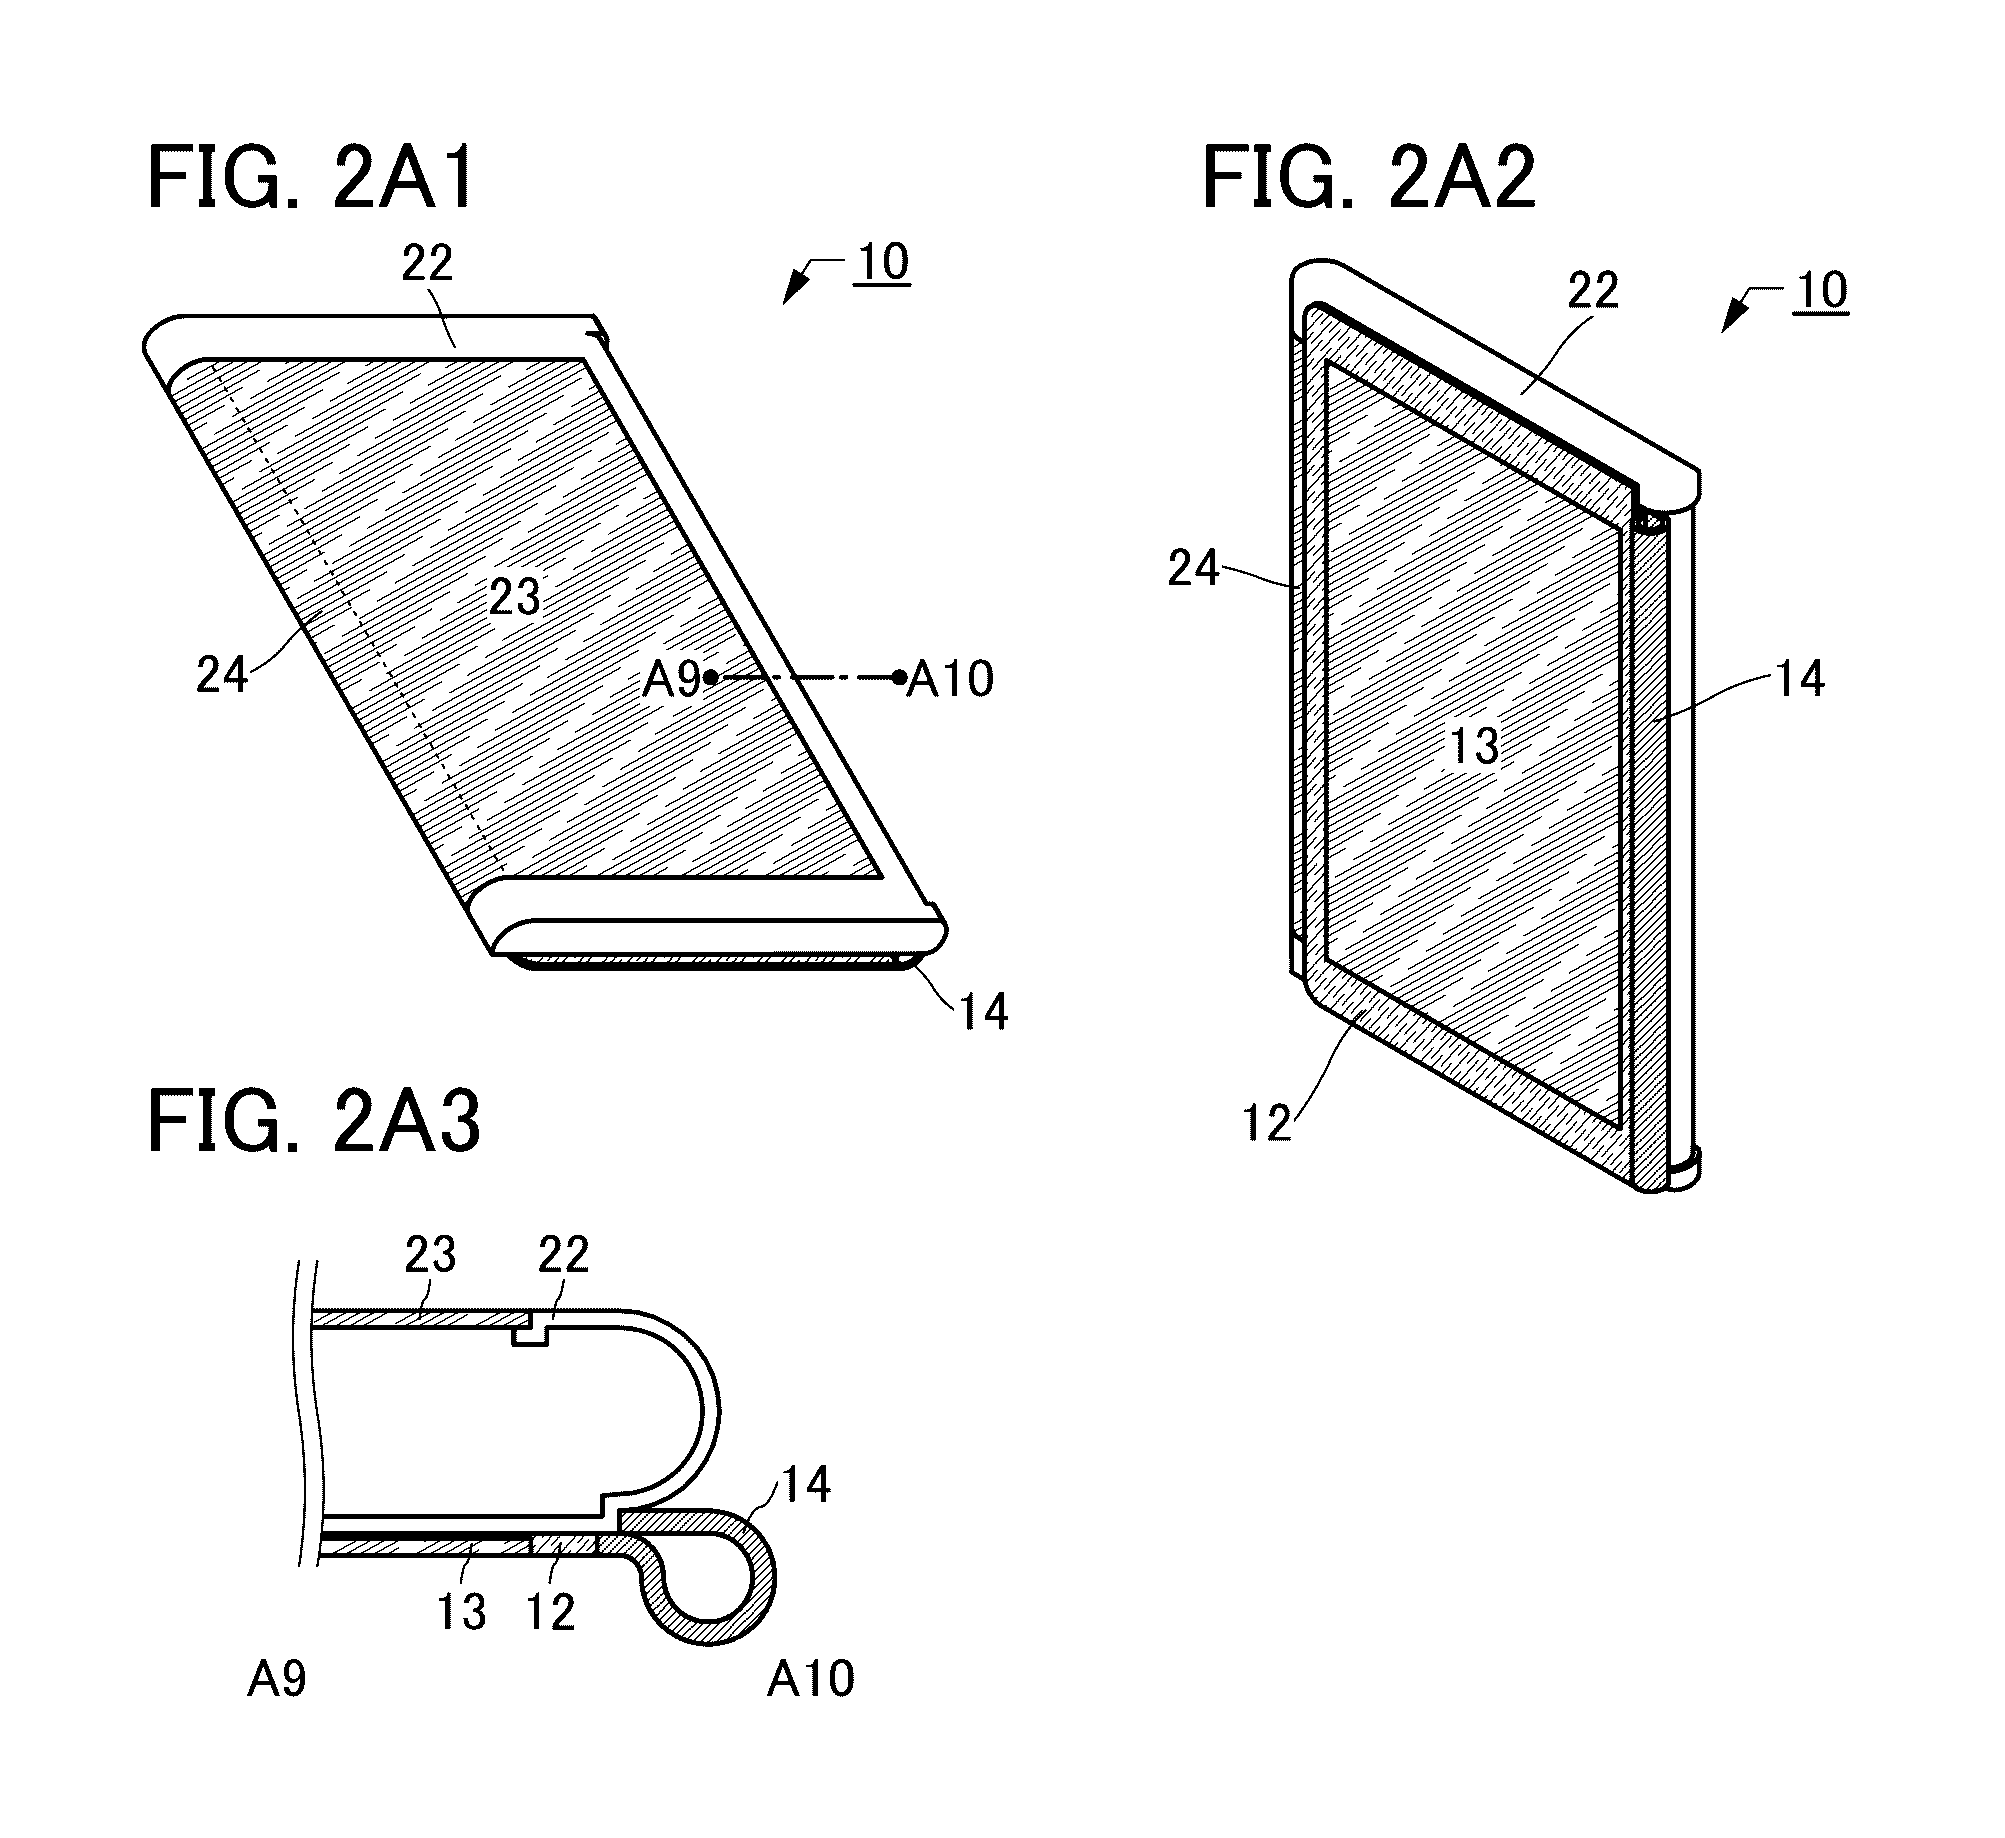 Display device, electronic device, and system